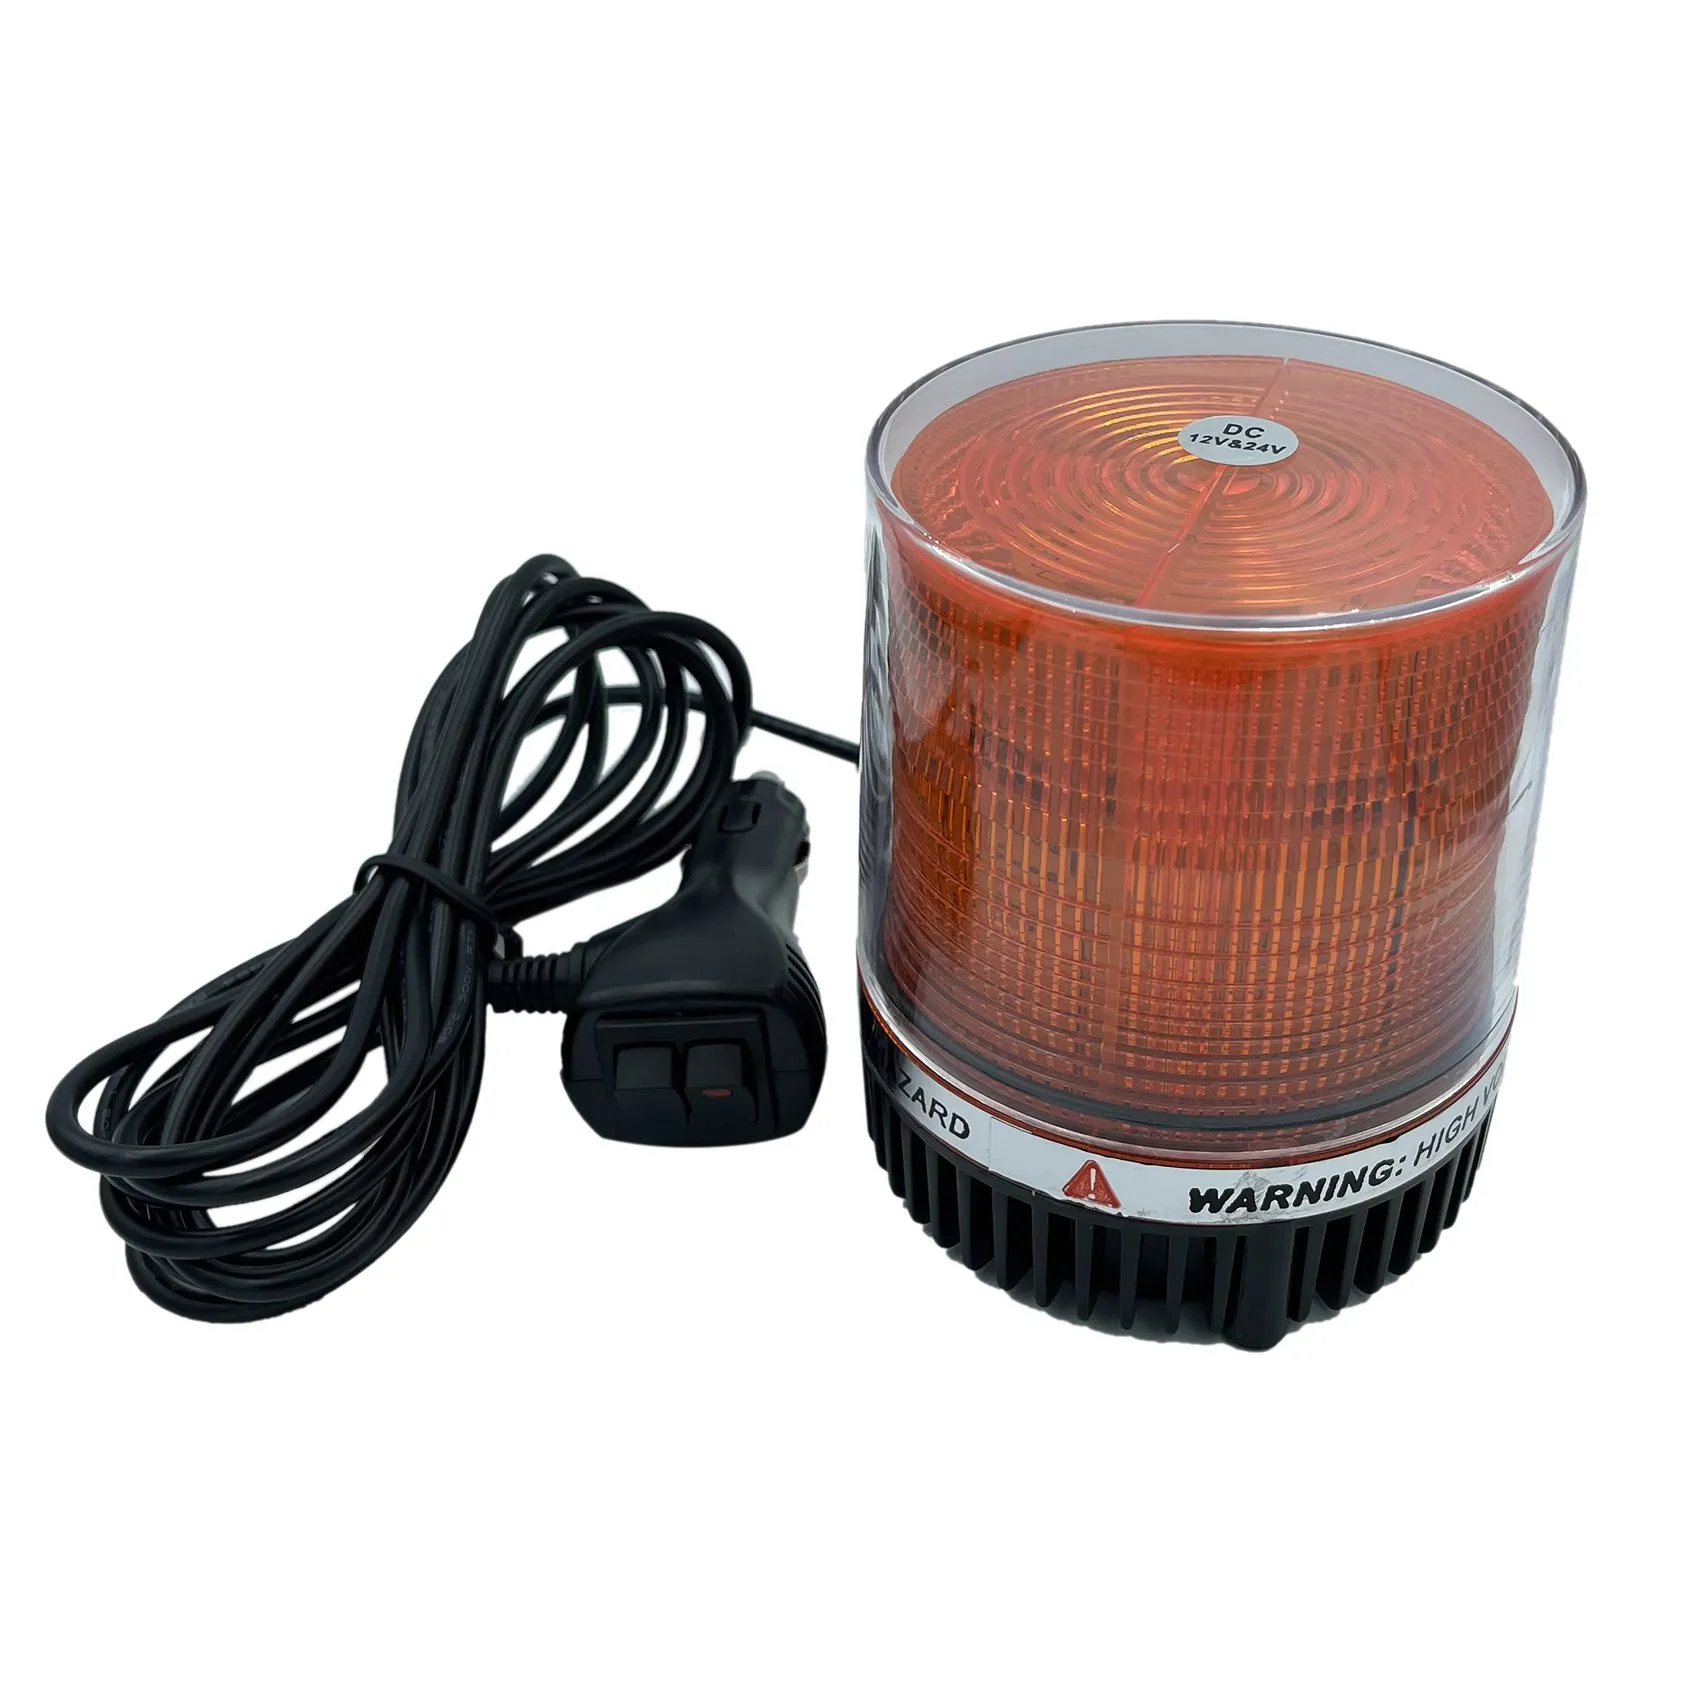 

Car Rotating Traffic Safety Light LED Strobe Beacon Light Rooftop Rotating Emergency Warning Truck Tractor